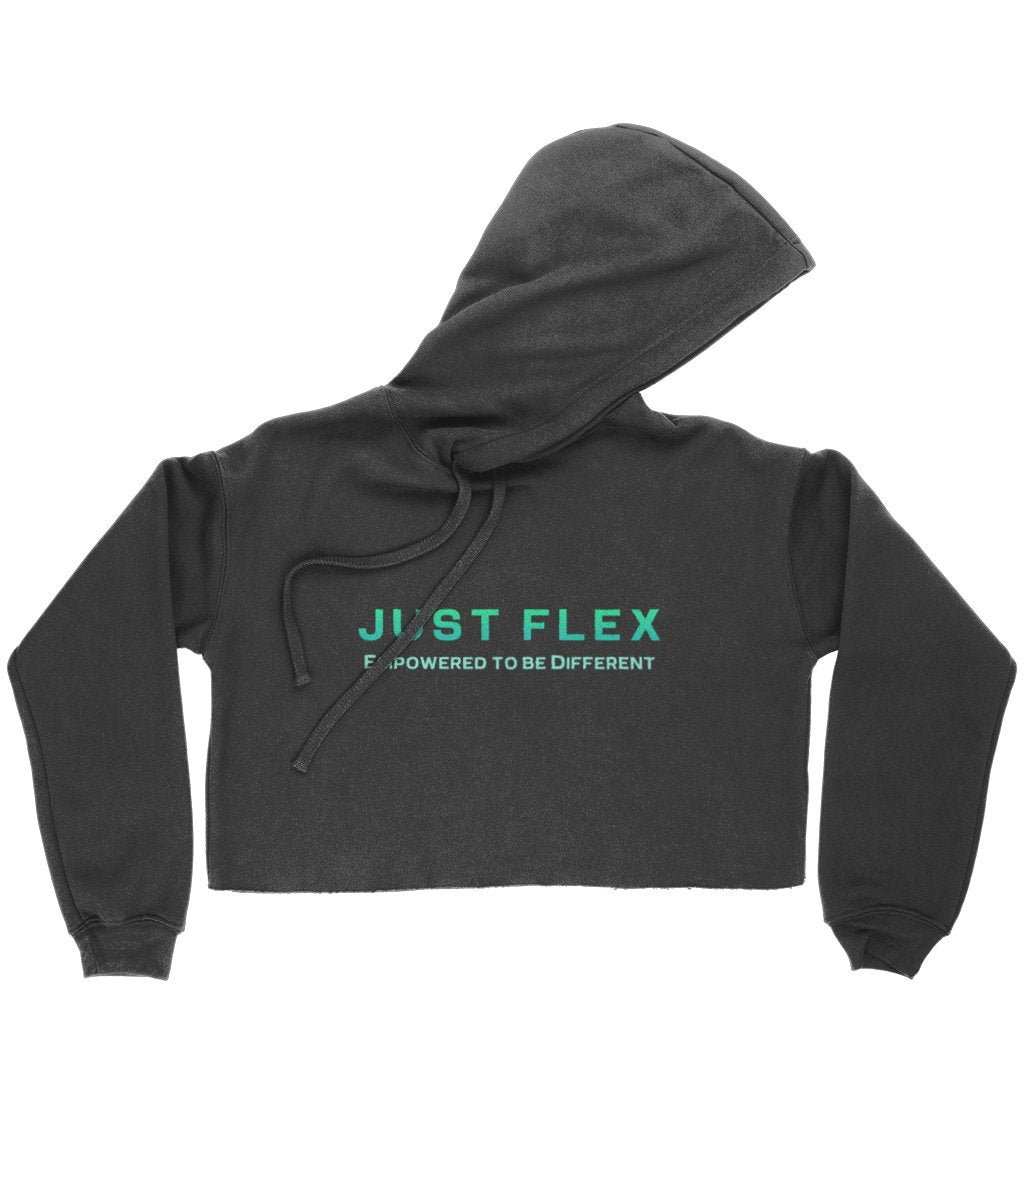 Just Flex - Empowered To Be Different Cropped Hoodie